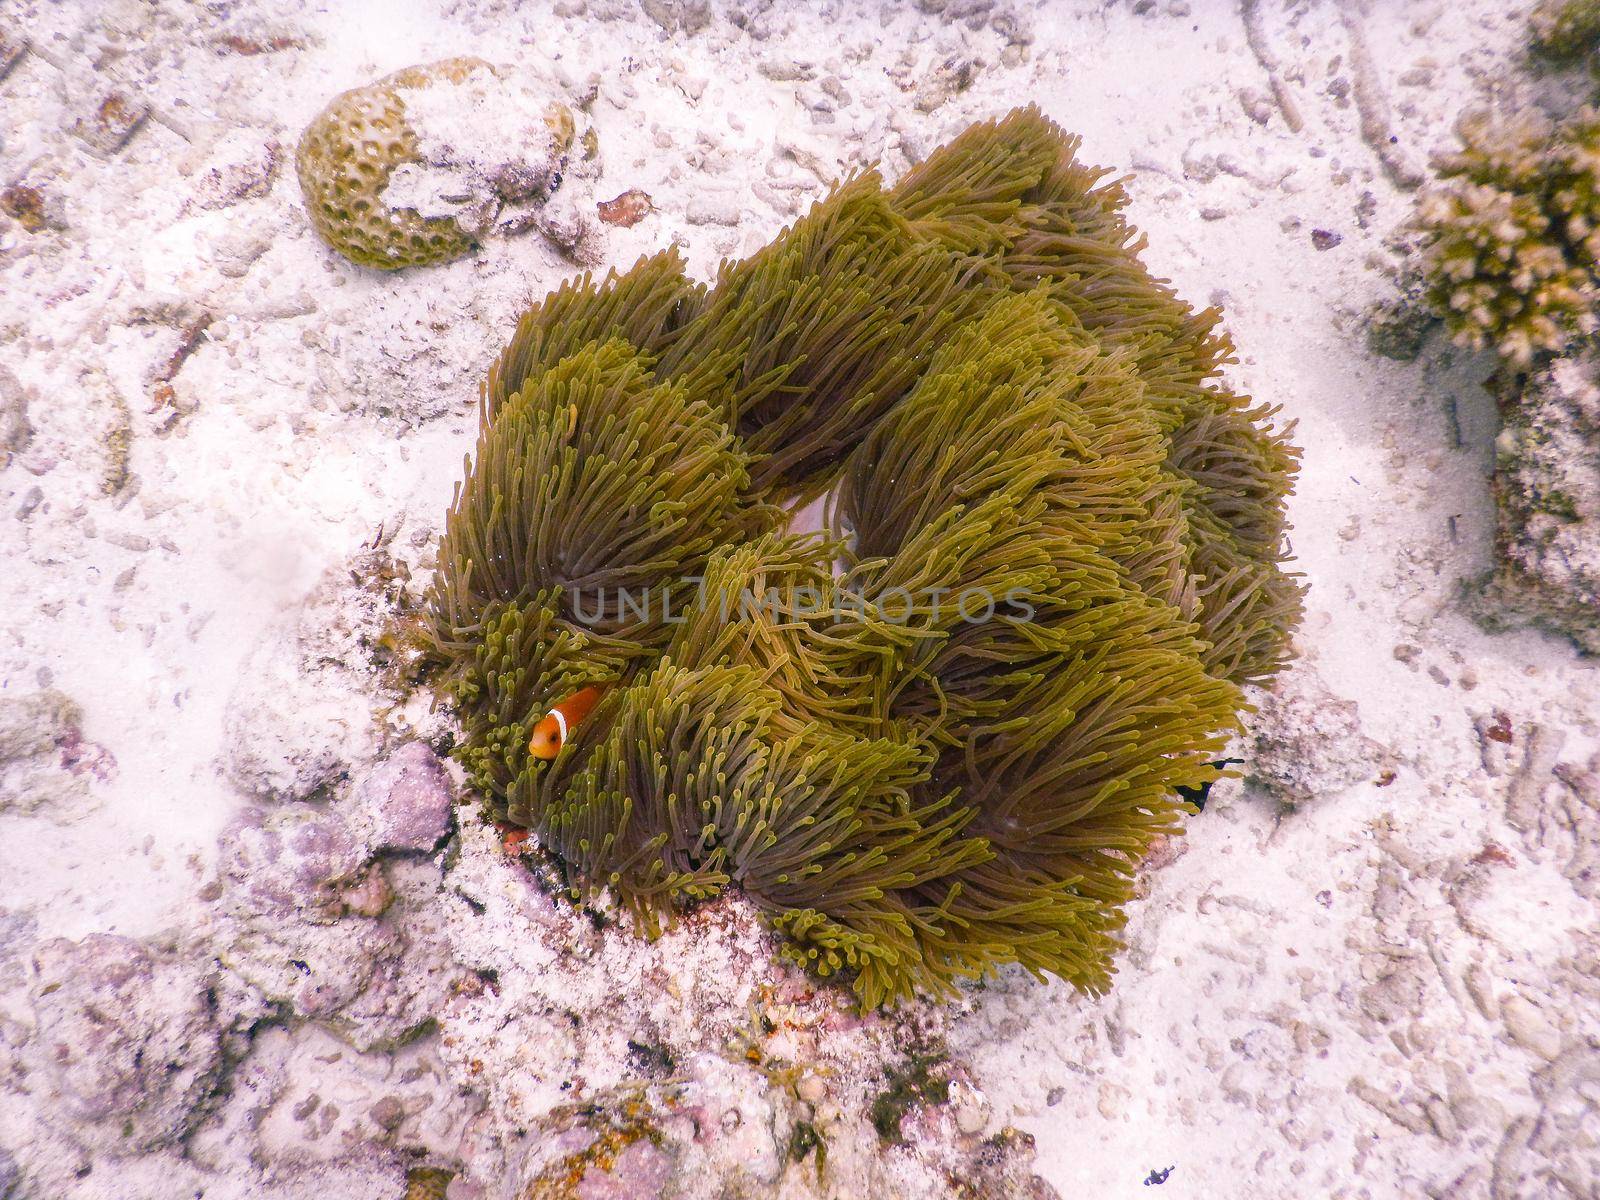 maldives, a solitary anemone grown after the tsunami and home to the clown fish